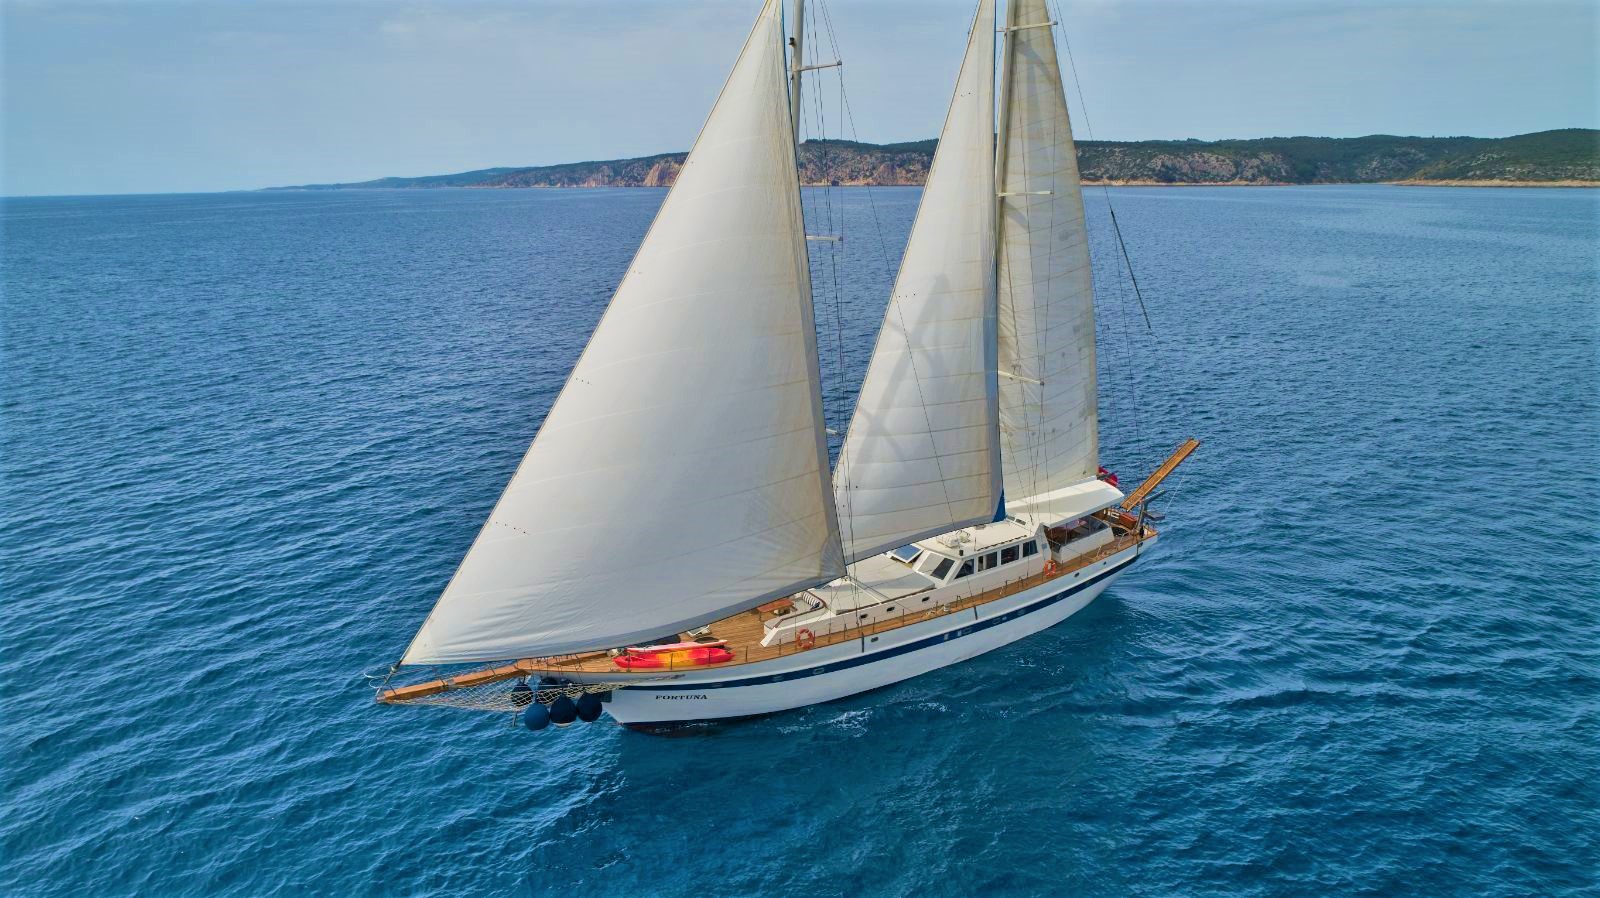 Aerial view of the Fortuna gulet with its sails up whilst at sea in Croatia